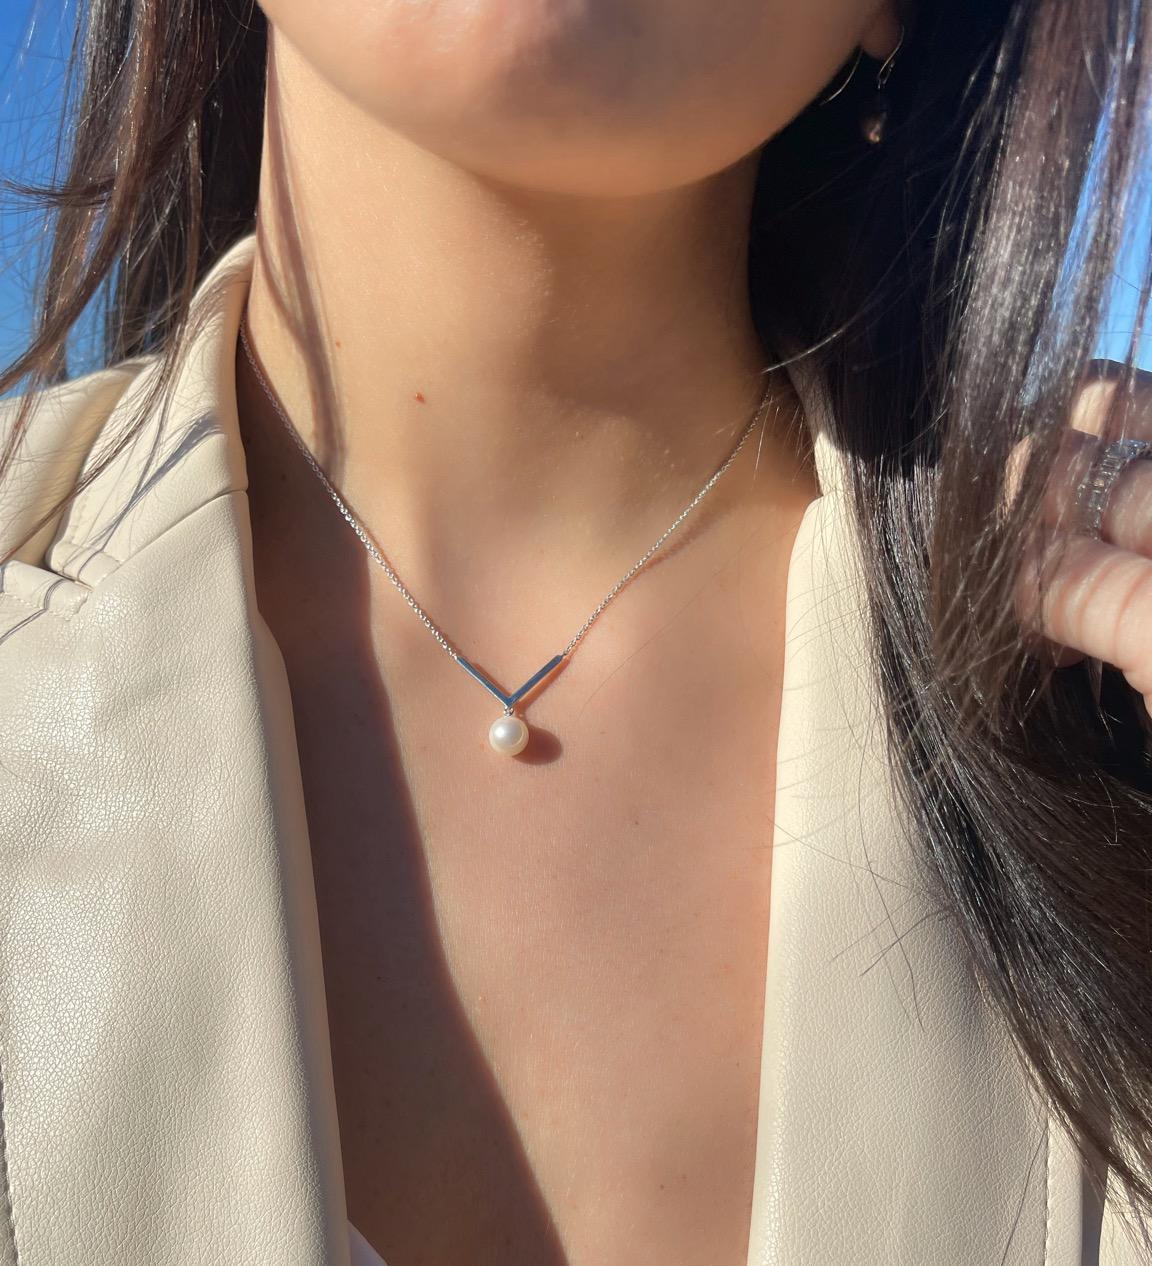 This popular style features a round Freshwater white pearl measuring 7.5-8mm dangling from a chevron style detail on a .925 Sterling Silver chain. This is a perfect necklace to layer or wear or its own. Enjoy this necklace as an everyday piece!